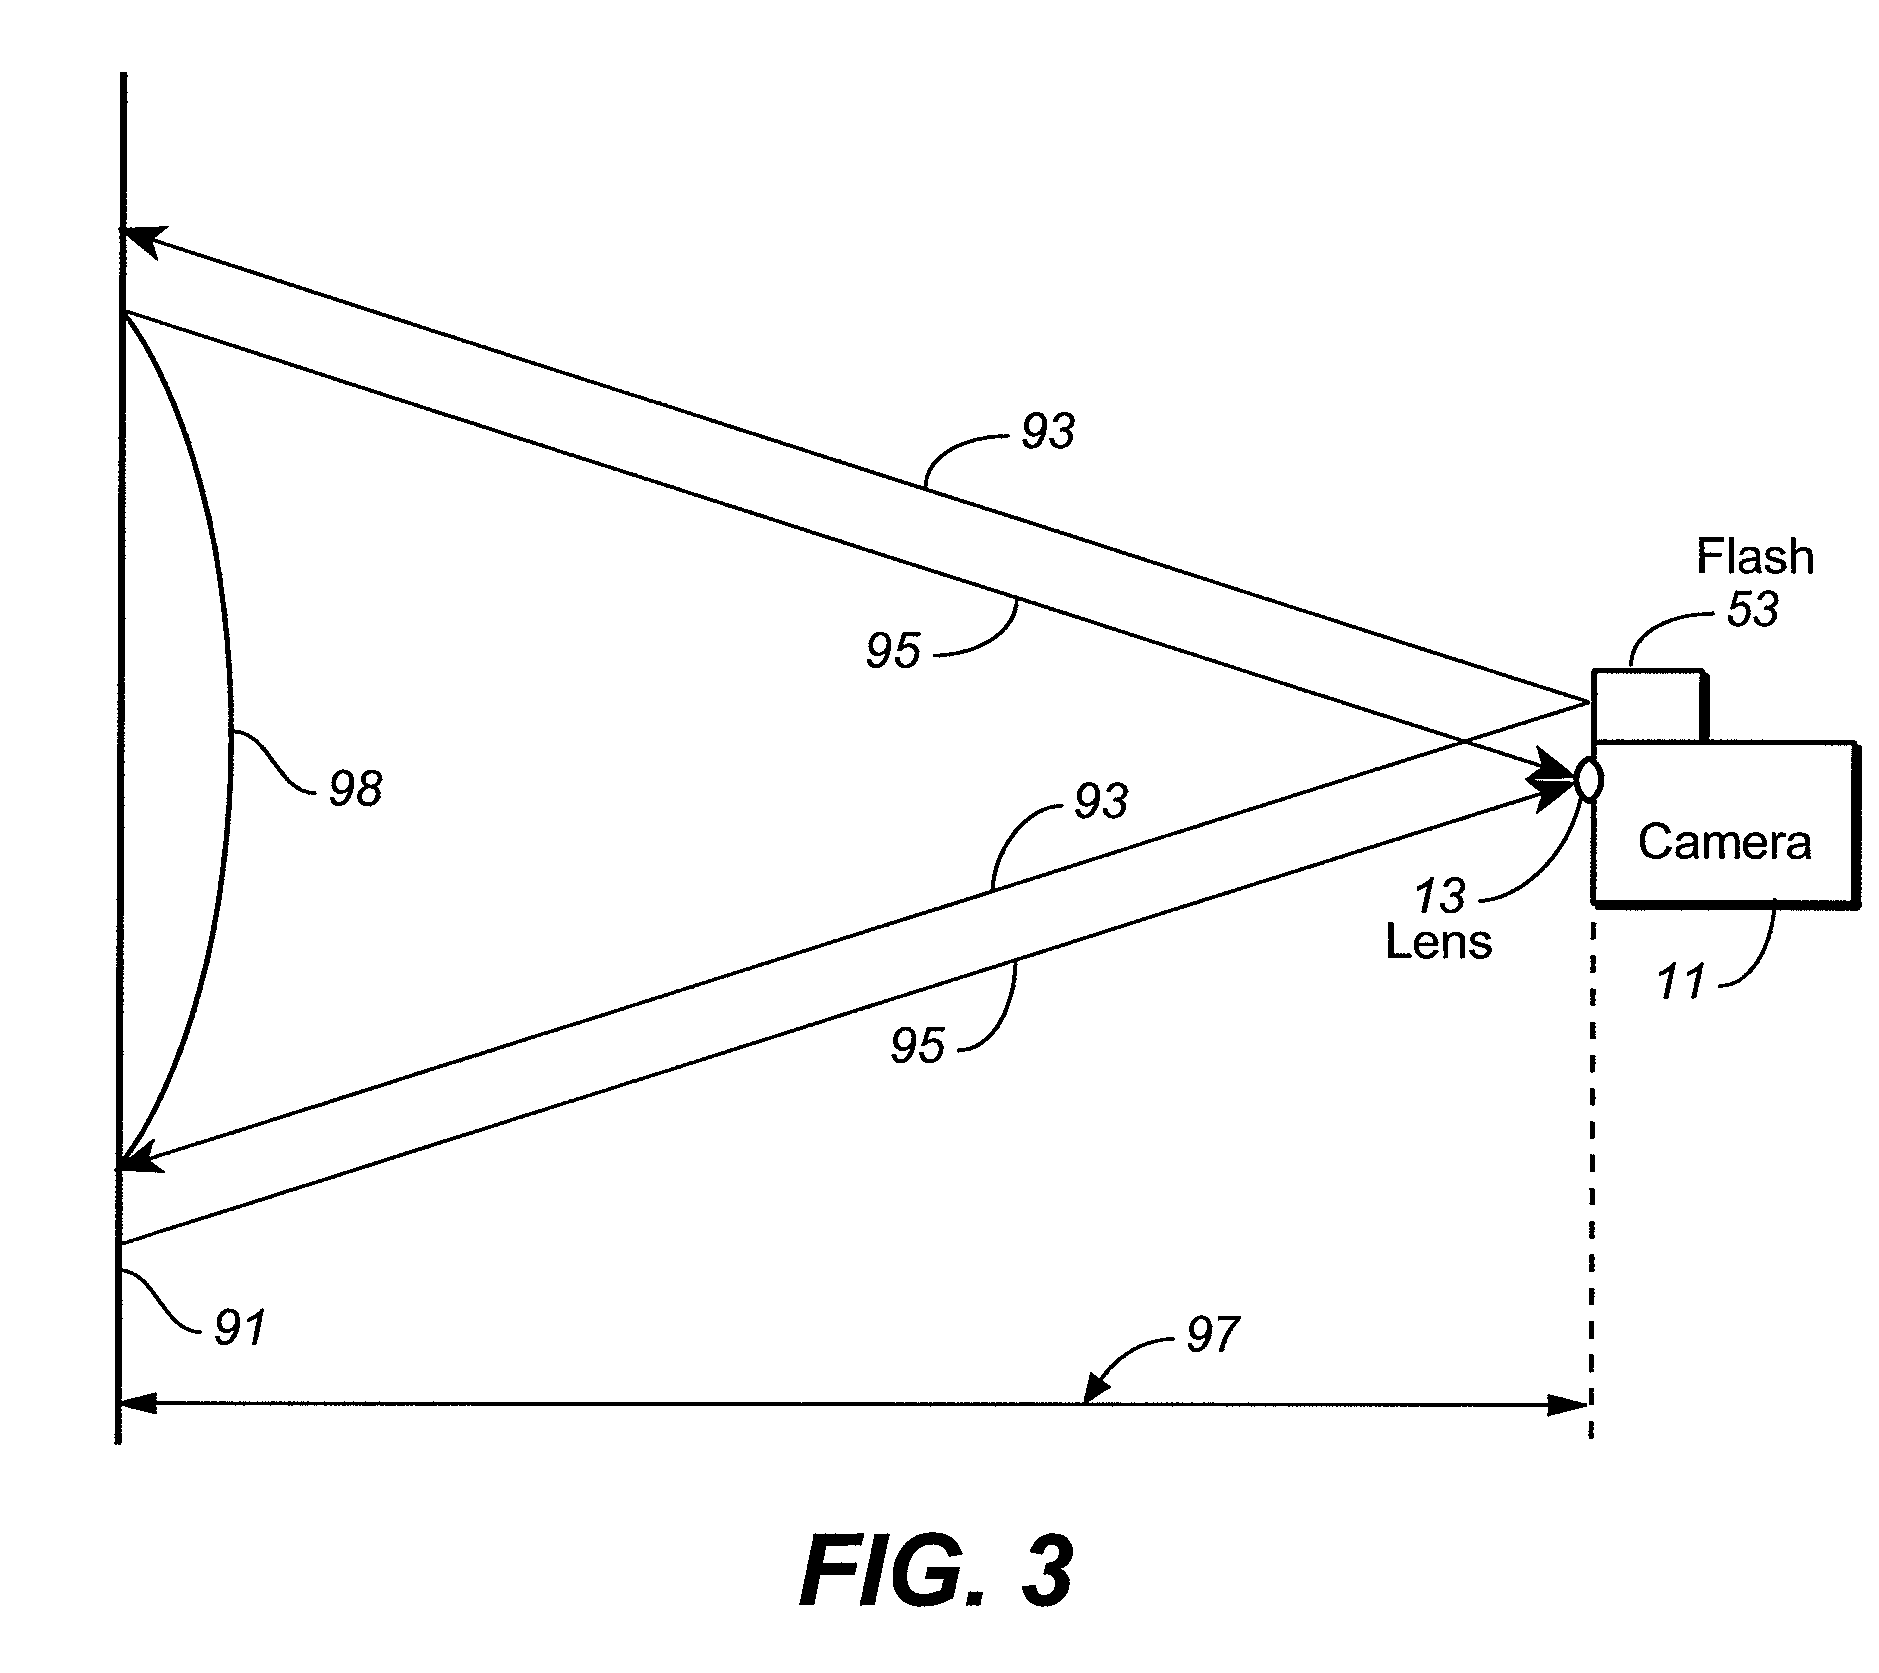 Compensating for Non-Uniform Illumination of Object Fields Captured by a Camera